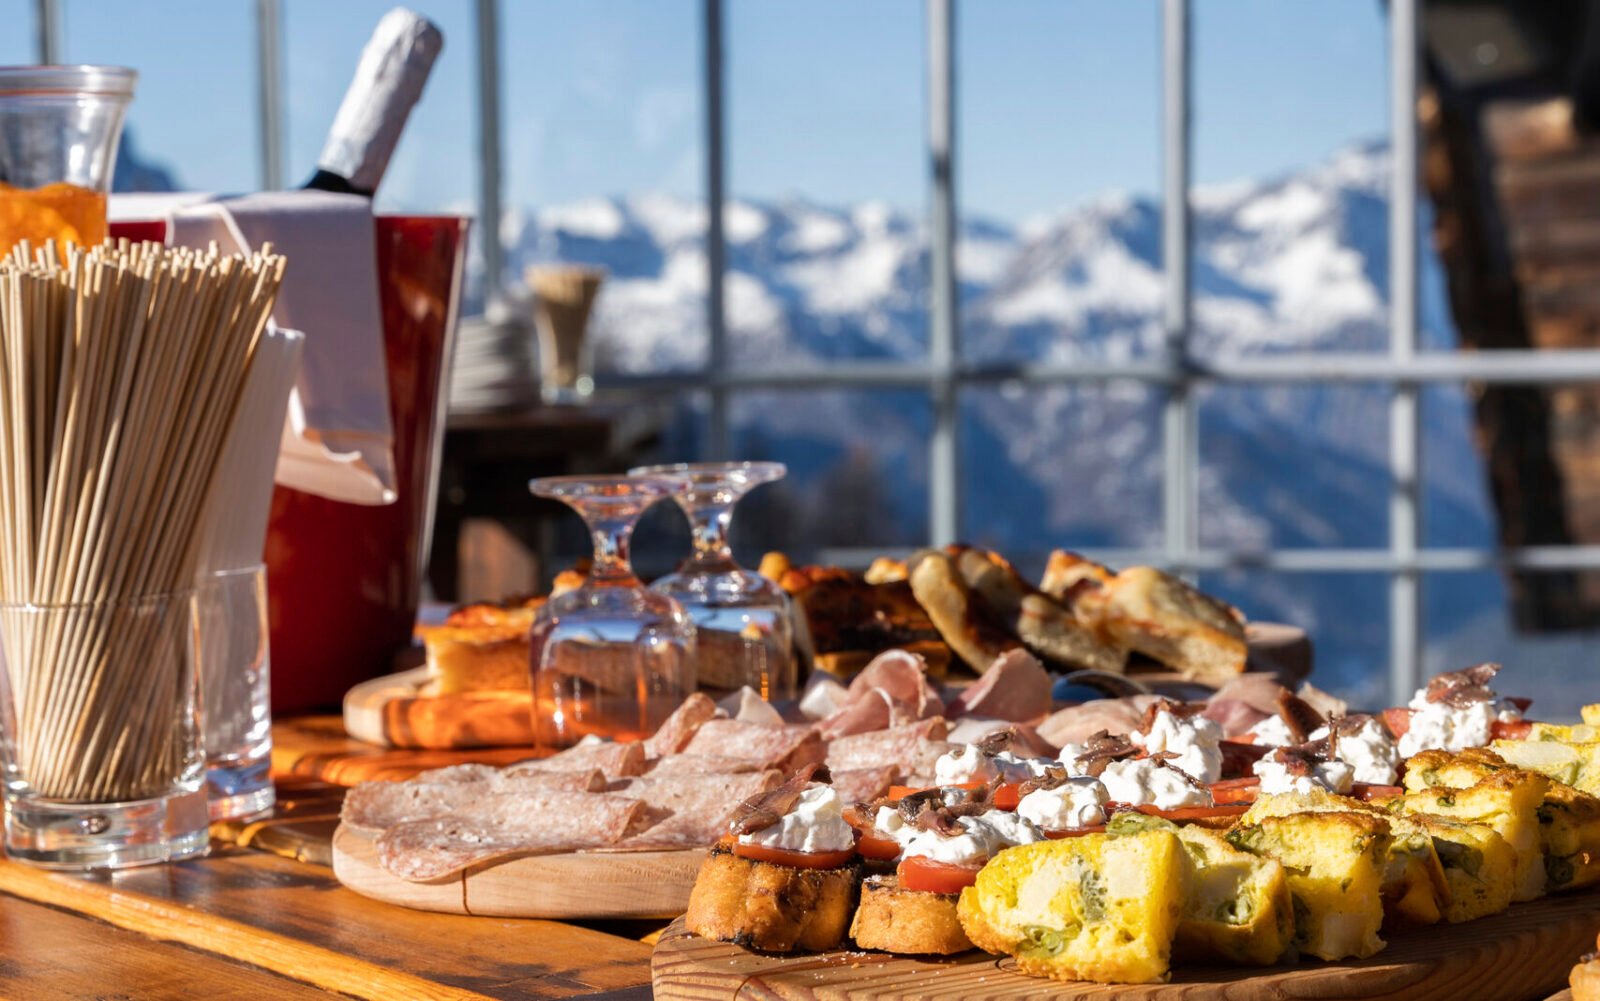 Charcuterie board and chilling wine at Club Med Tignes with snowy mountains in background